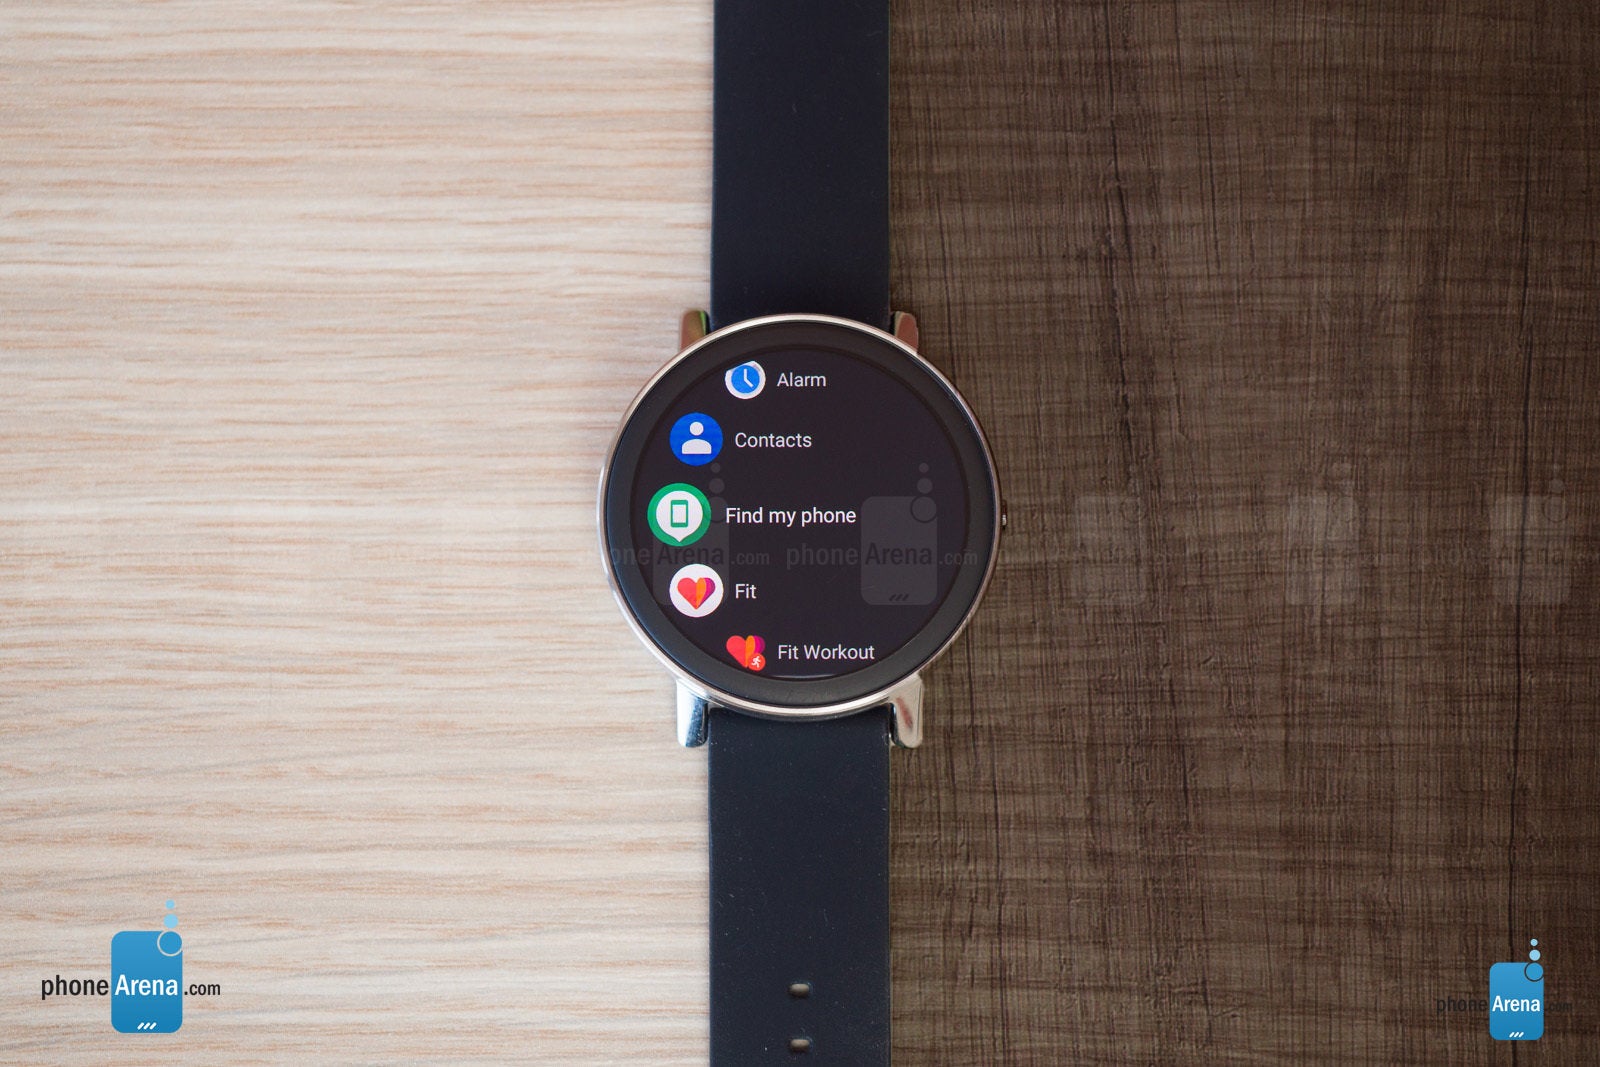 Google Pixel watch rumor review: price, release date, and new features